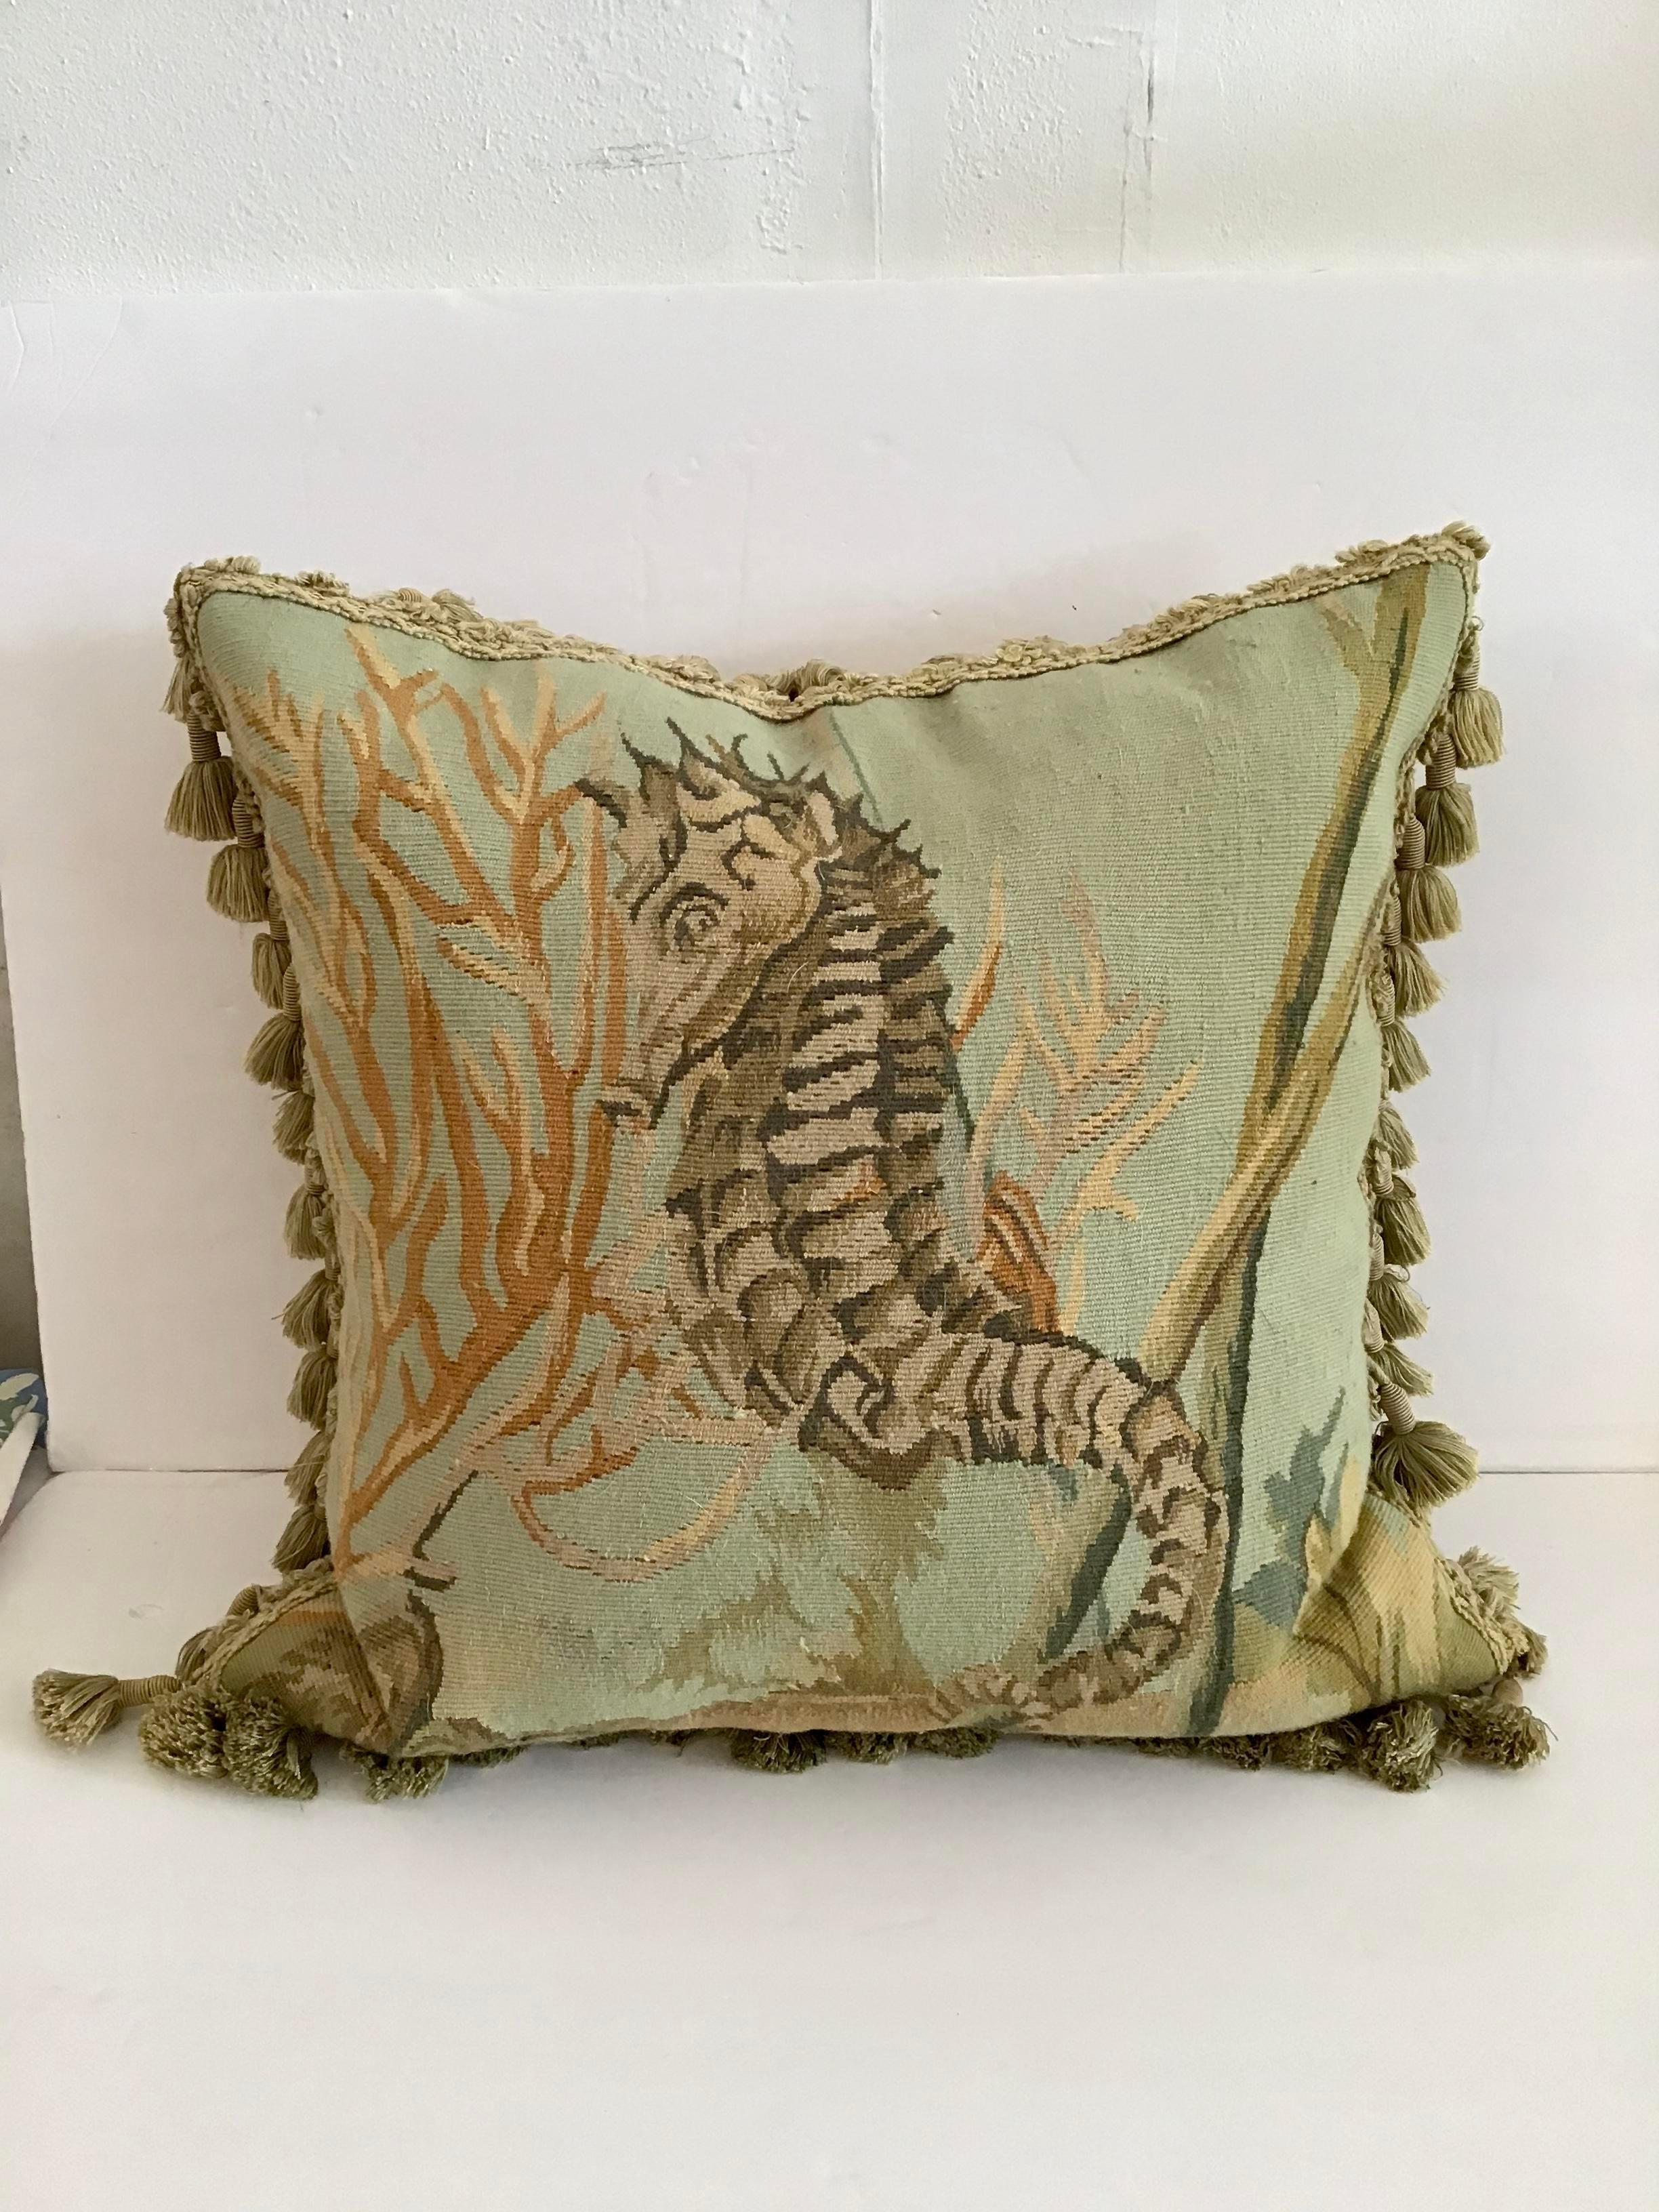 Gorgeous handwork on this Aubusson down pillow with decorative fringe. Add some chic style to your decor. Includes down pillow insert